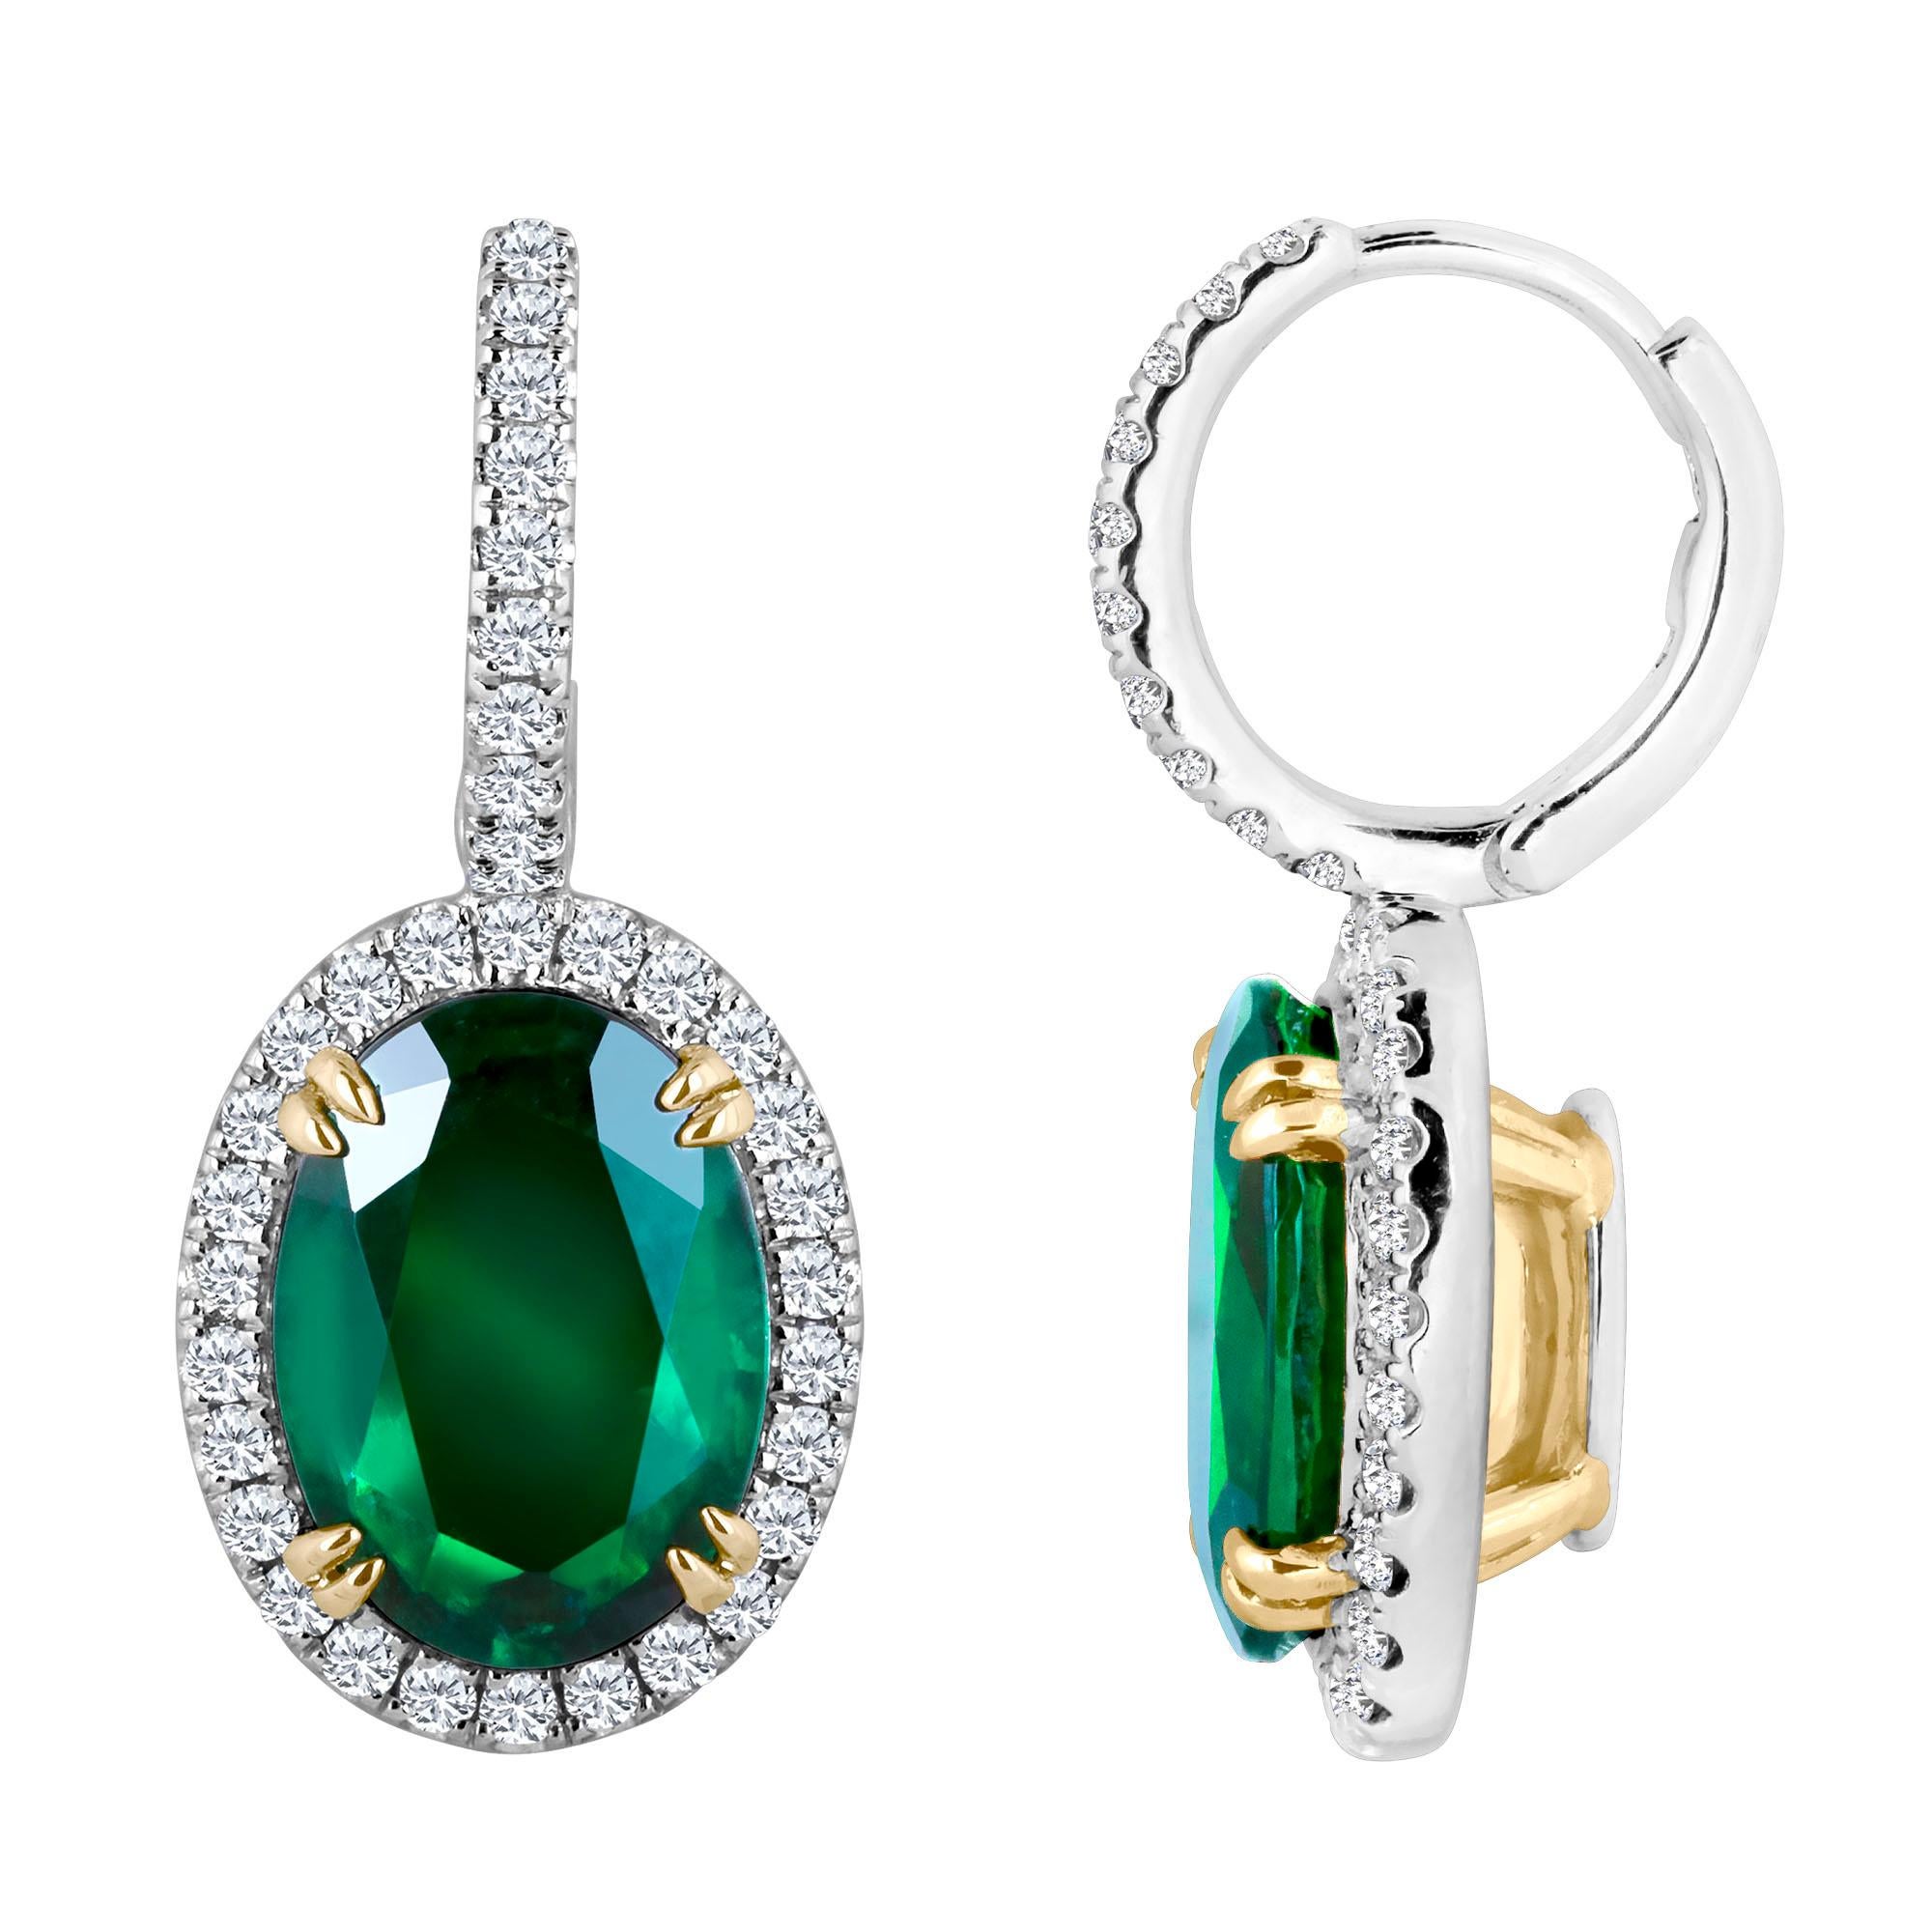 Emilio Jewelry Certified 8.49 Carat Platinum Emerald Diamond Earrings In New Condition For Sale In New York, NY